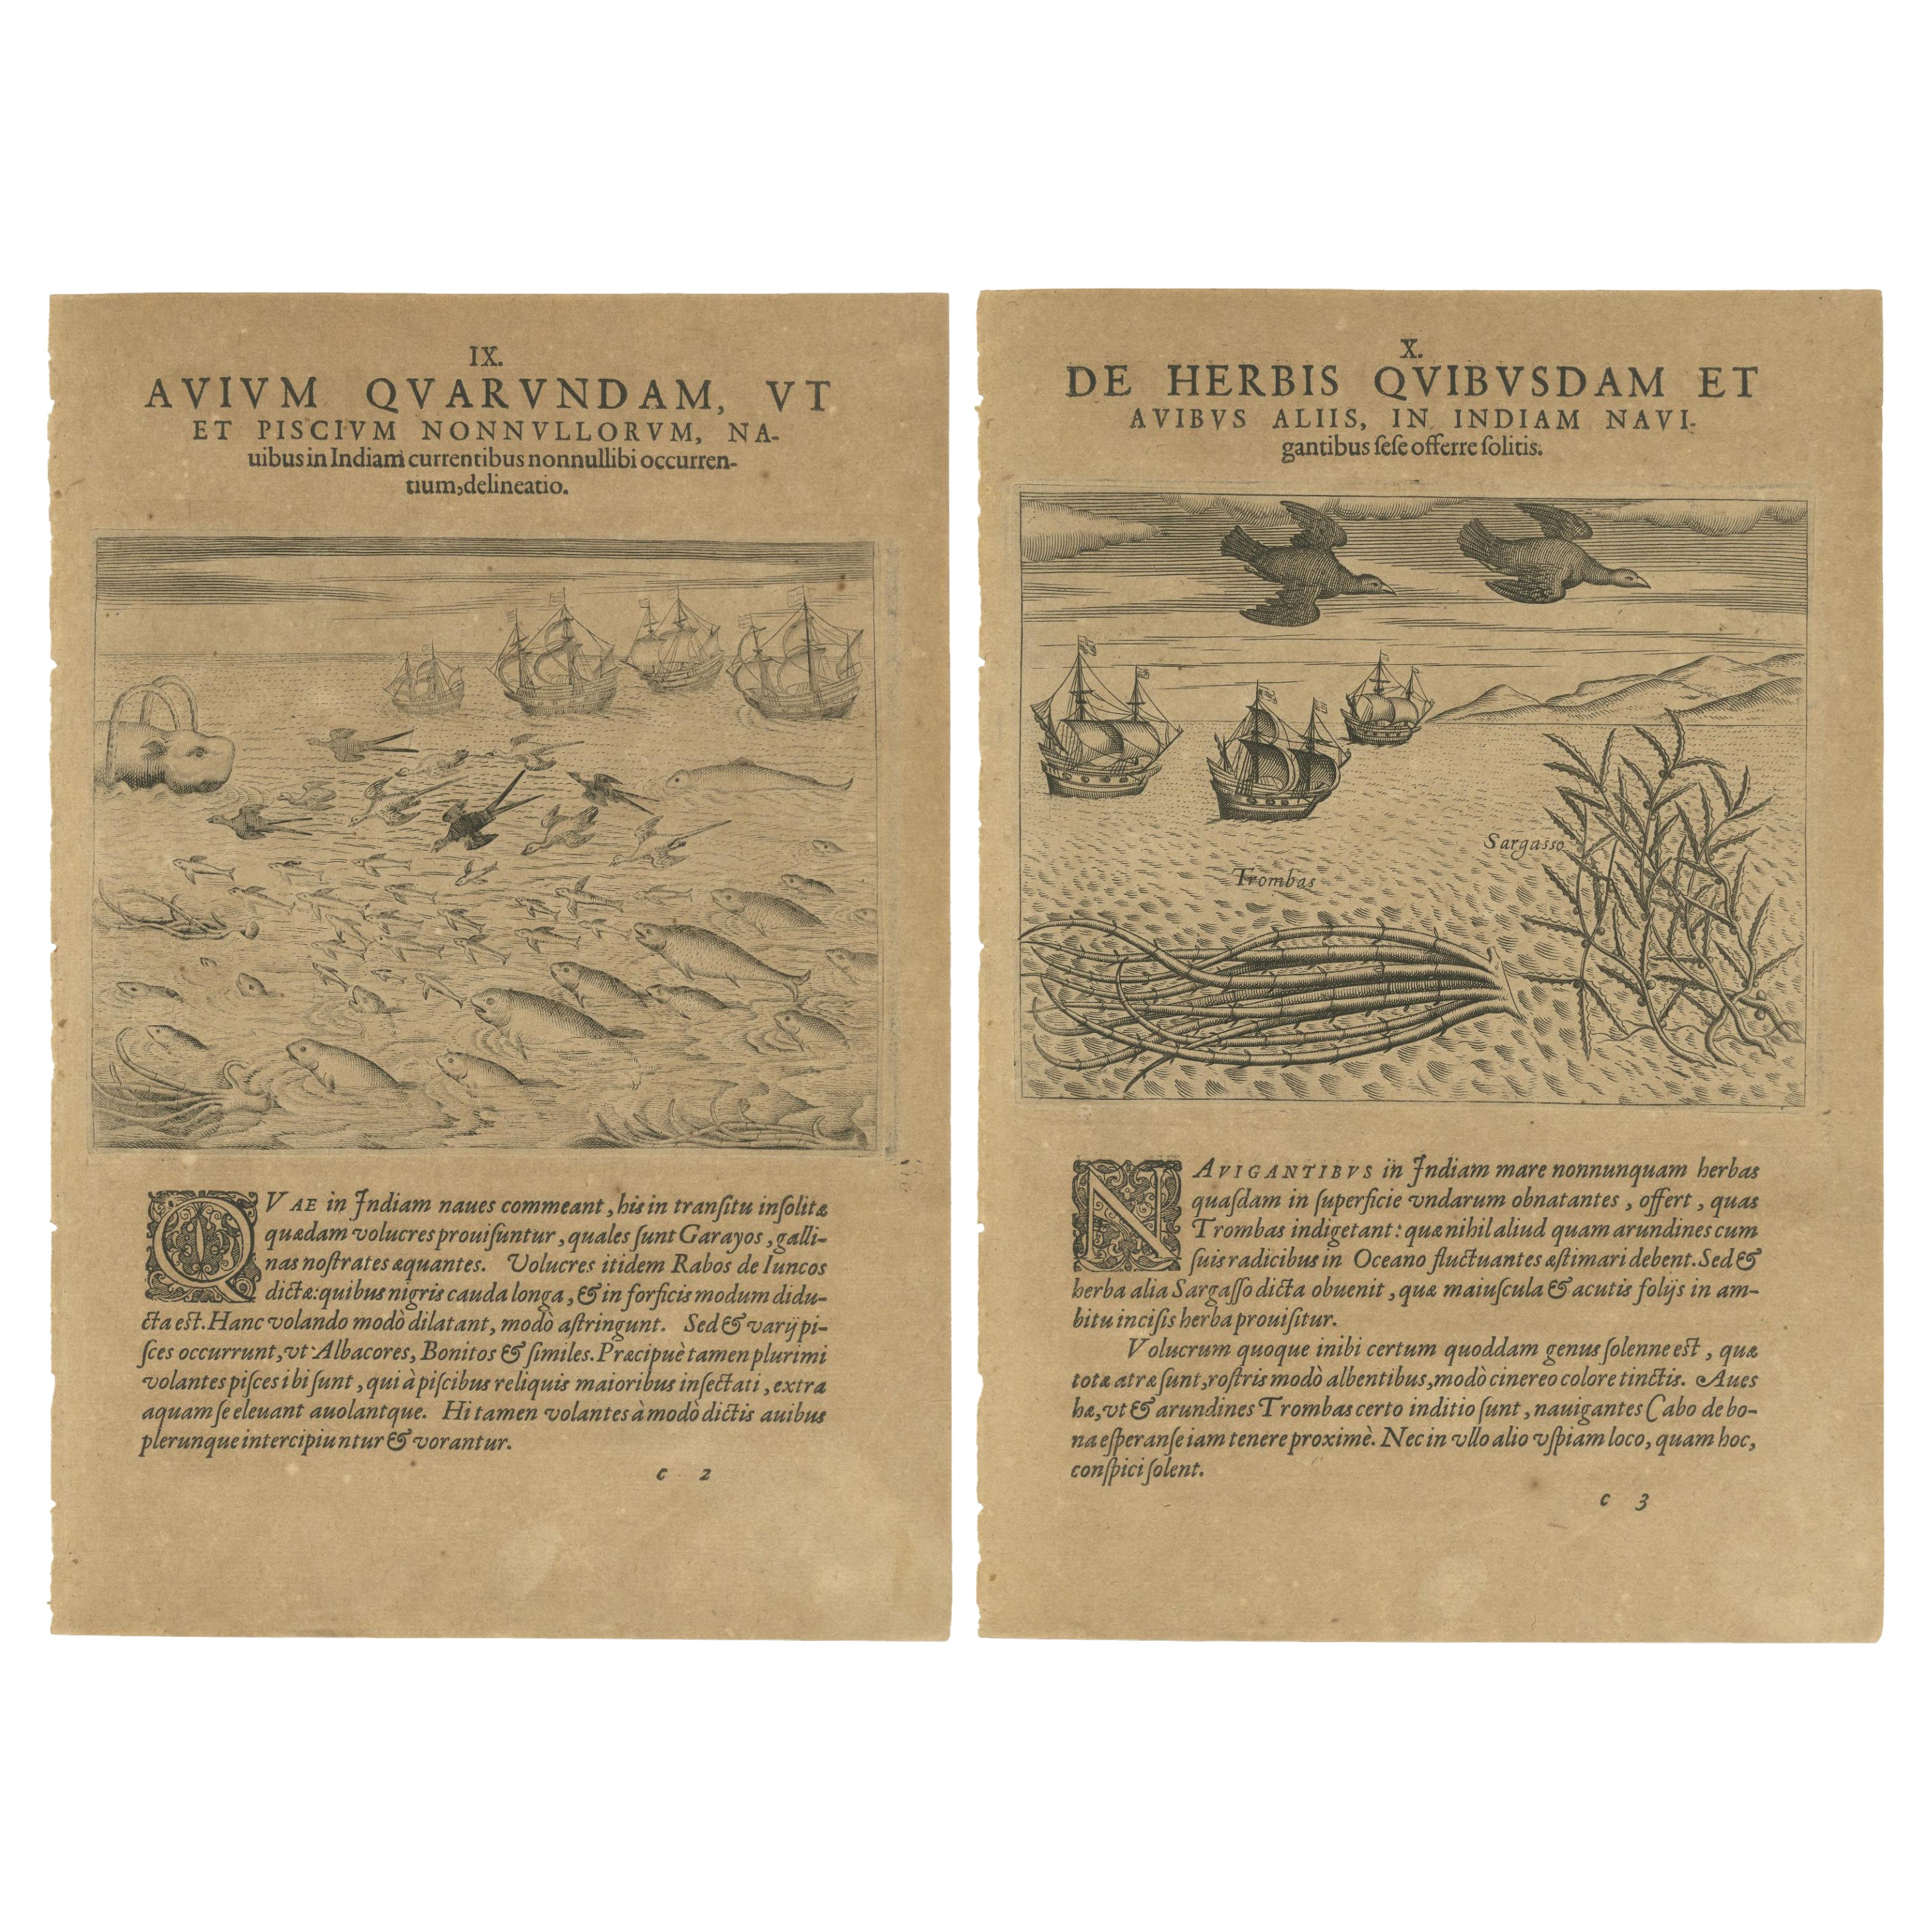 Maritime Life and Flora: Antique Engravings by De Bry, 1601 For Sale